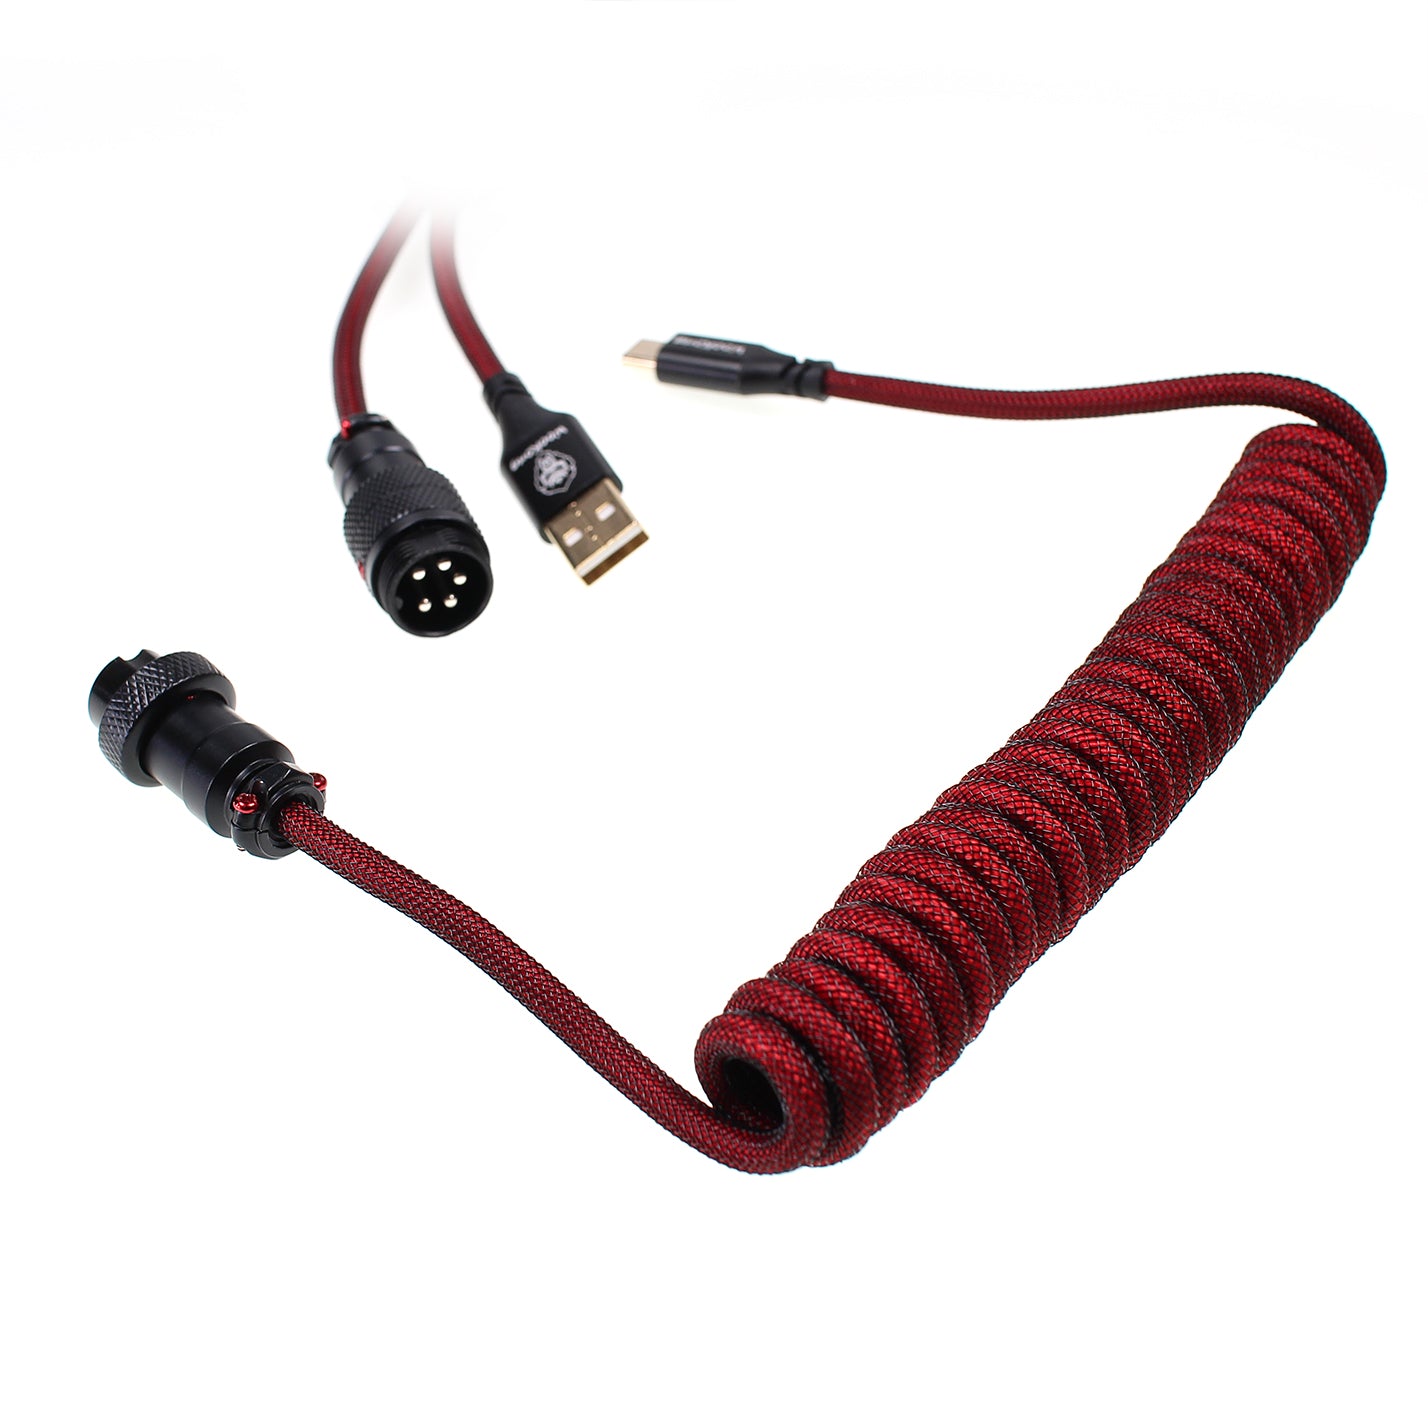 Wookong Aviator Coiled USB Cables for Keyboards - Red / Black